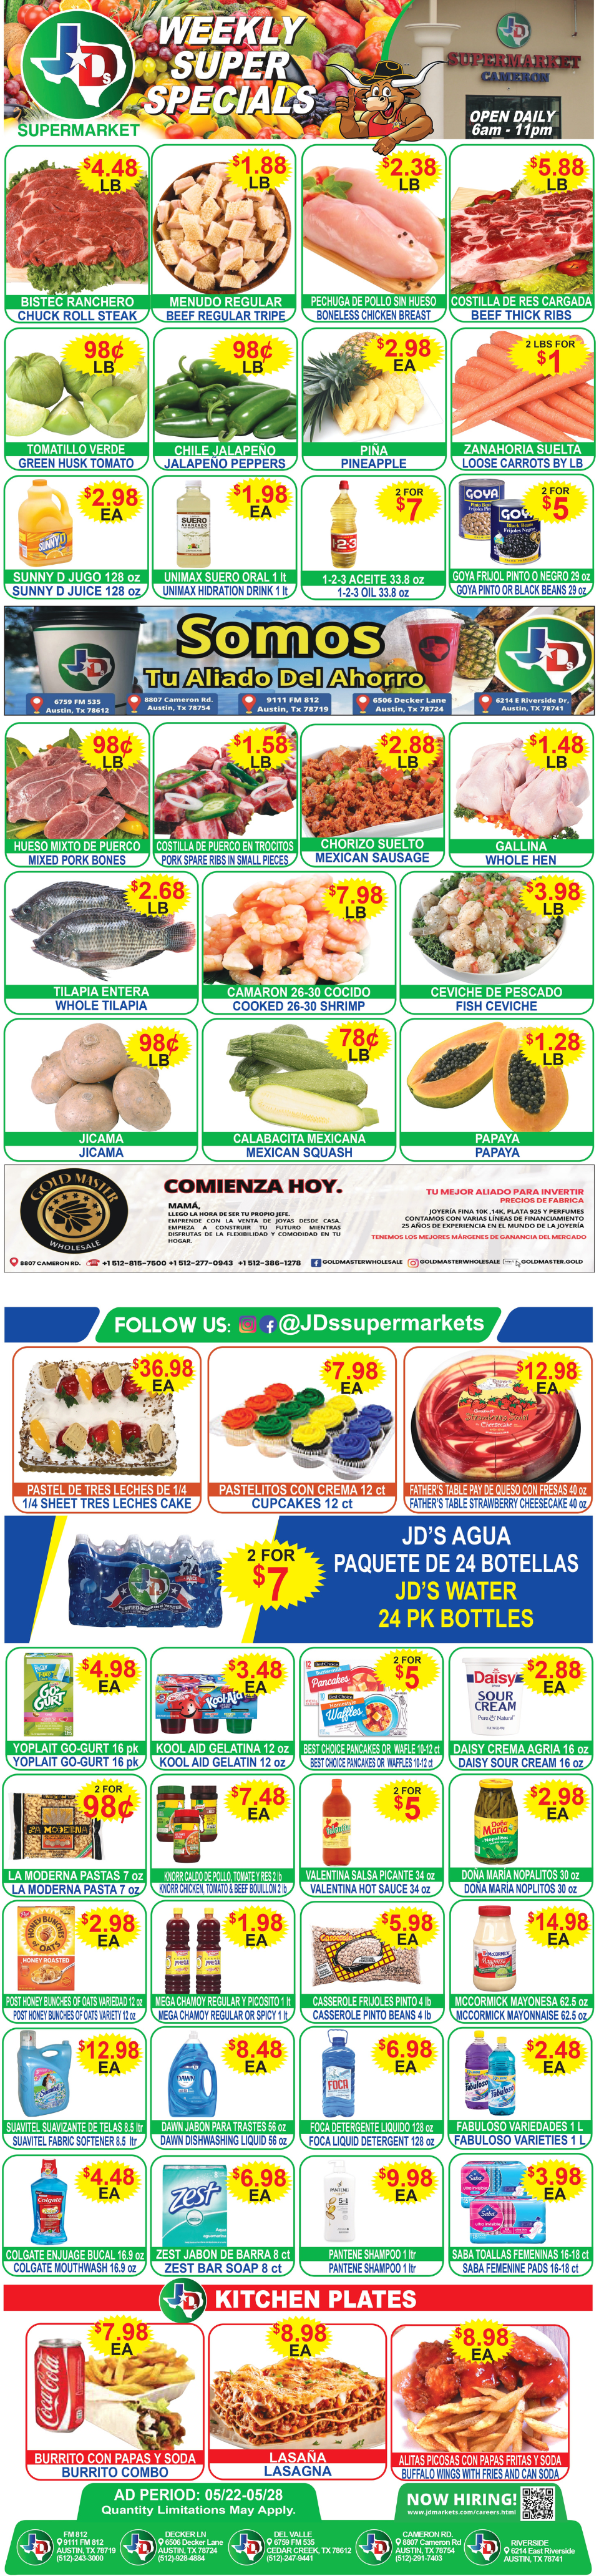 JD's Supermarkets Instore Ad - Page 1